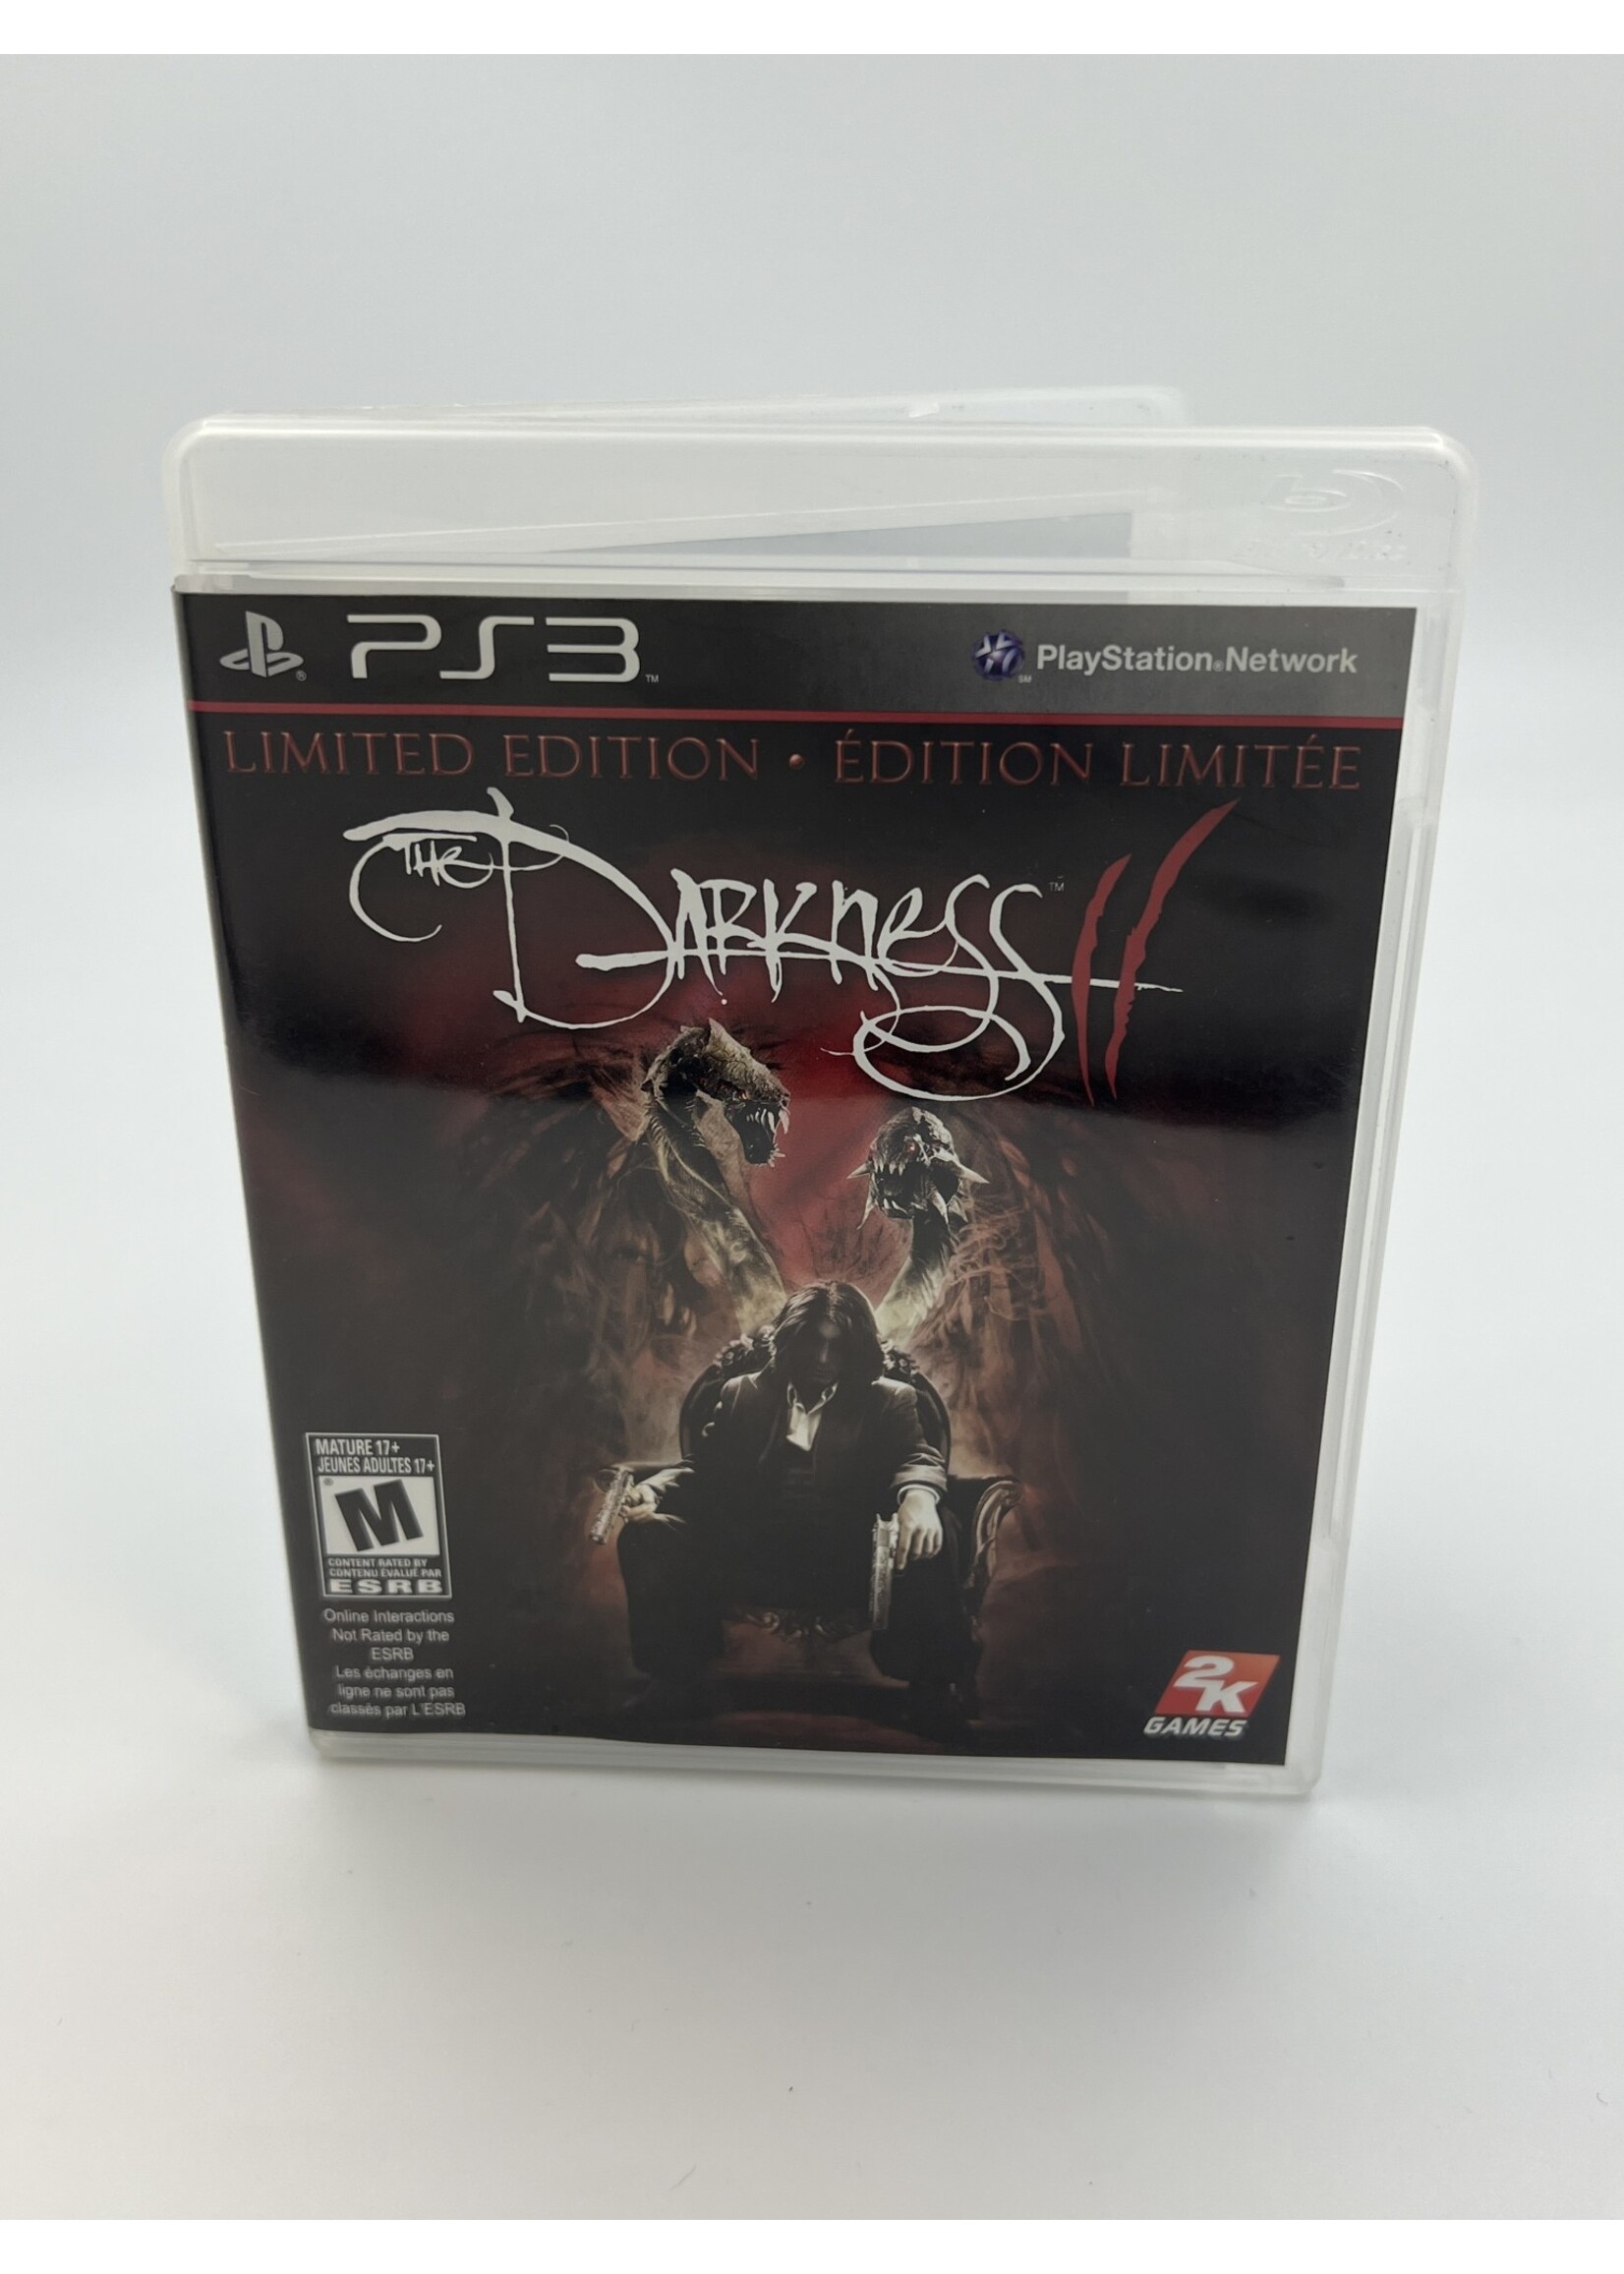 Sony The Darkness 2 Limited Edition PS3